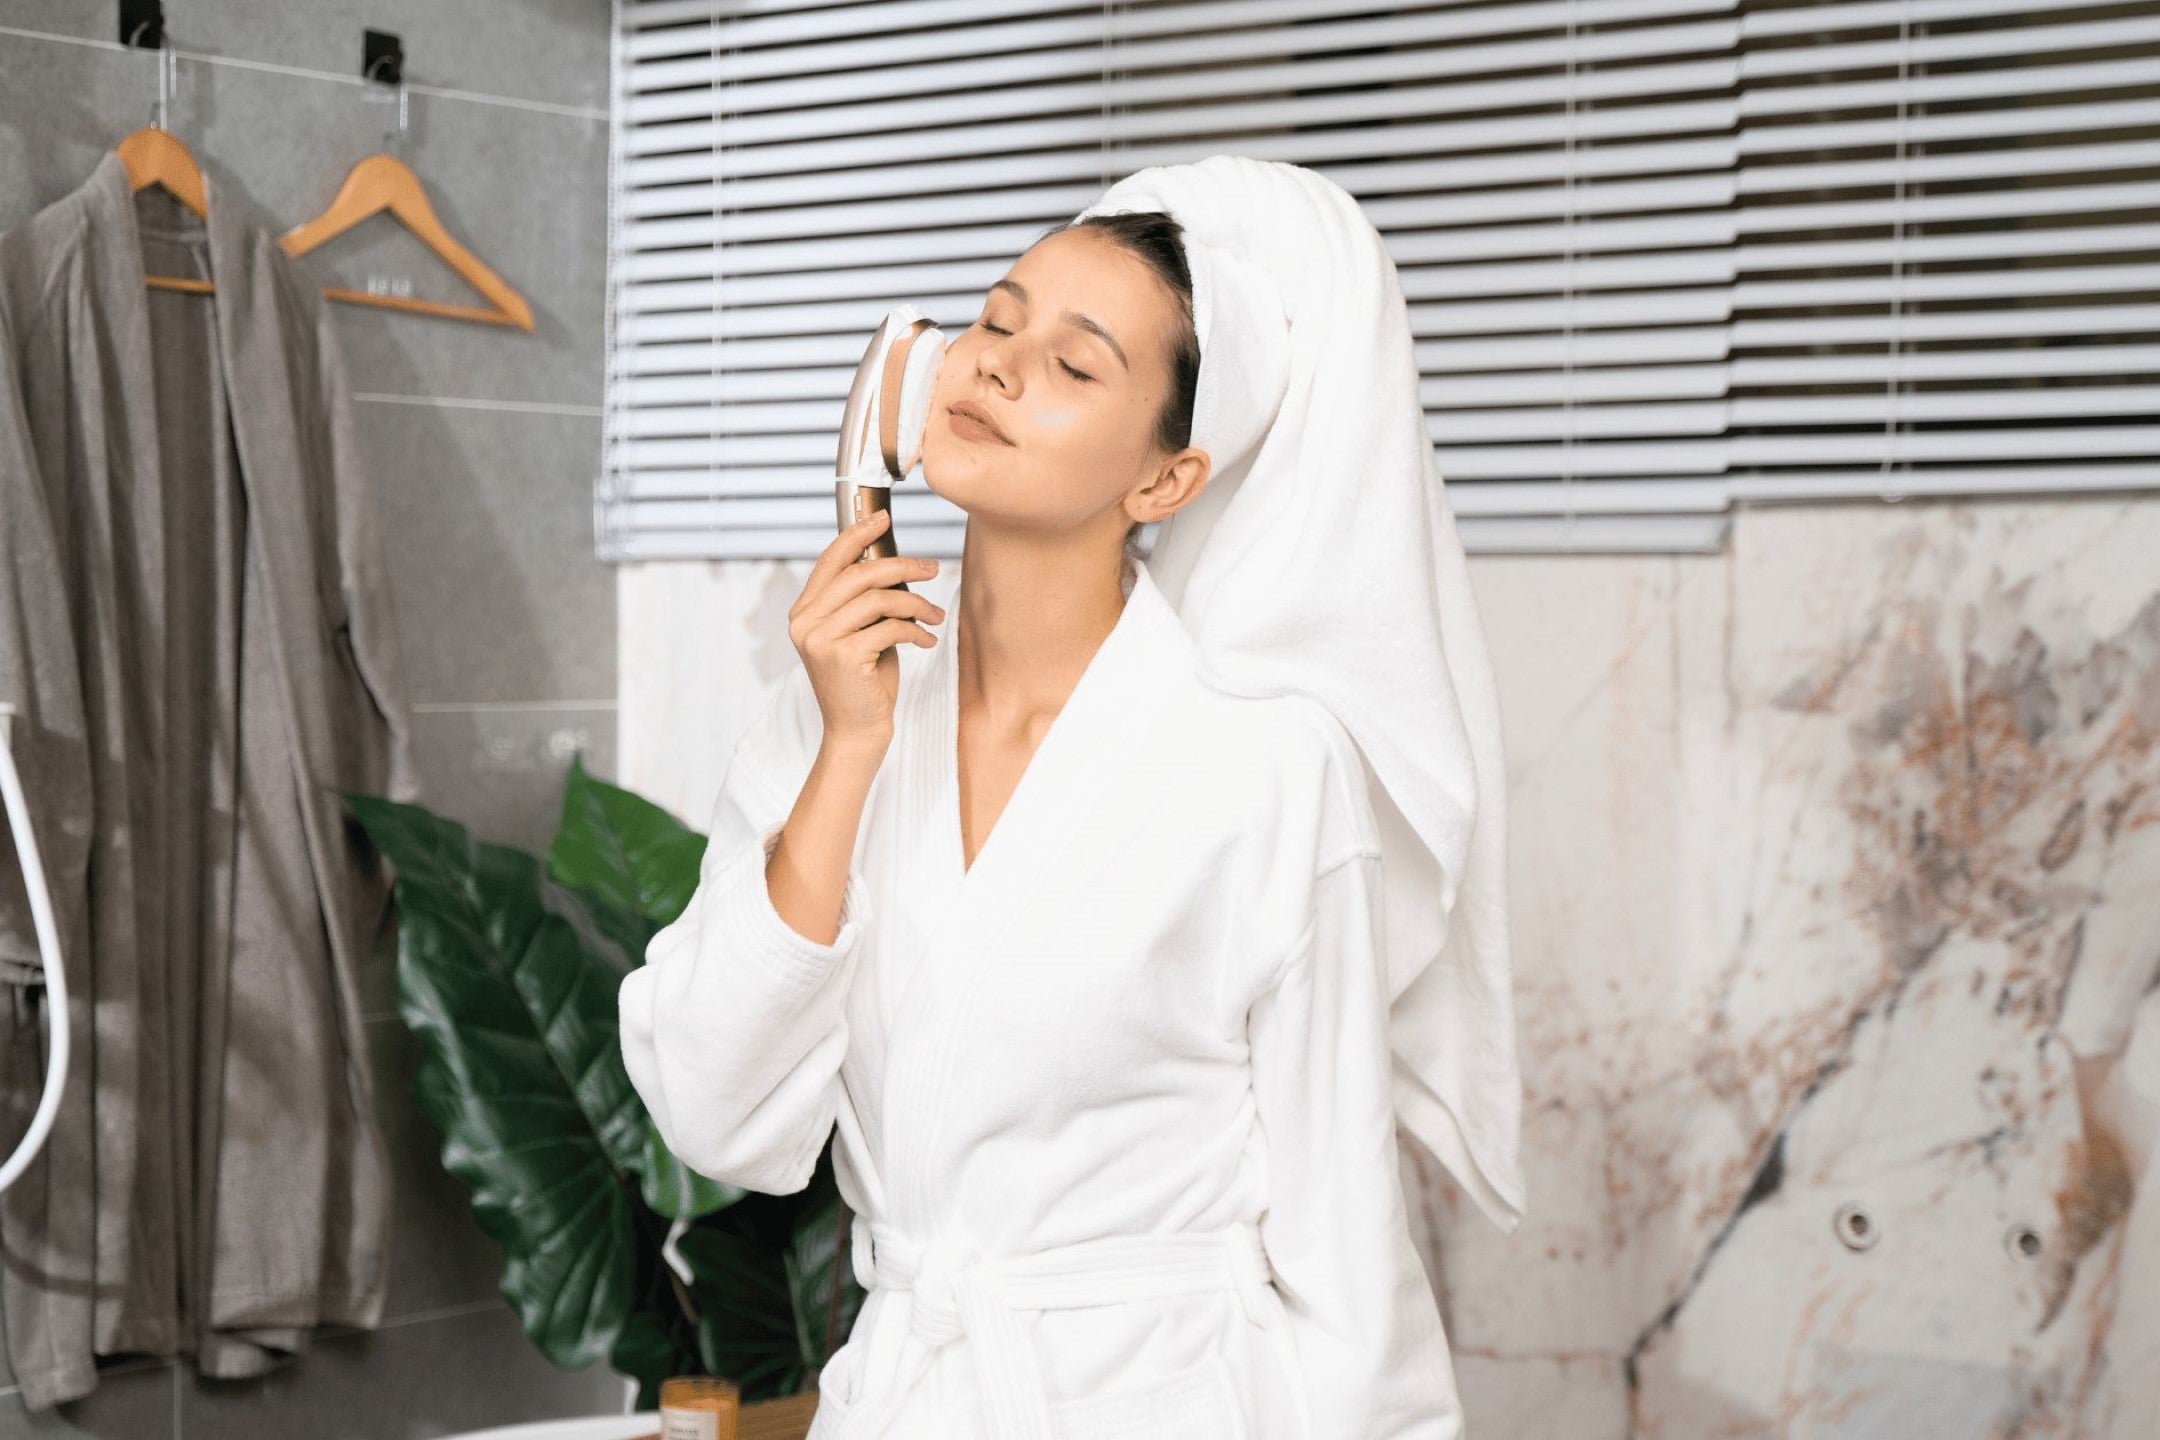 A relaxed woman in a bathrobe and towel is performing a microcurrent facial massage with a handheld beauty device.